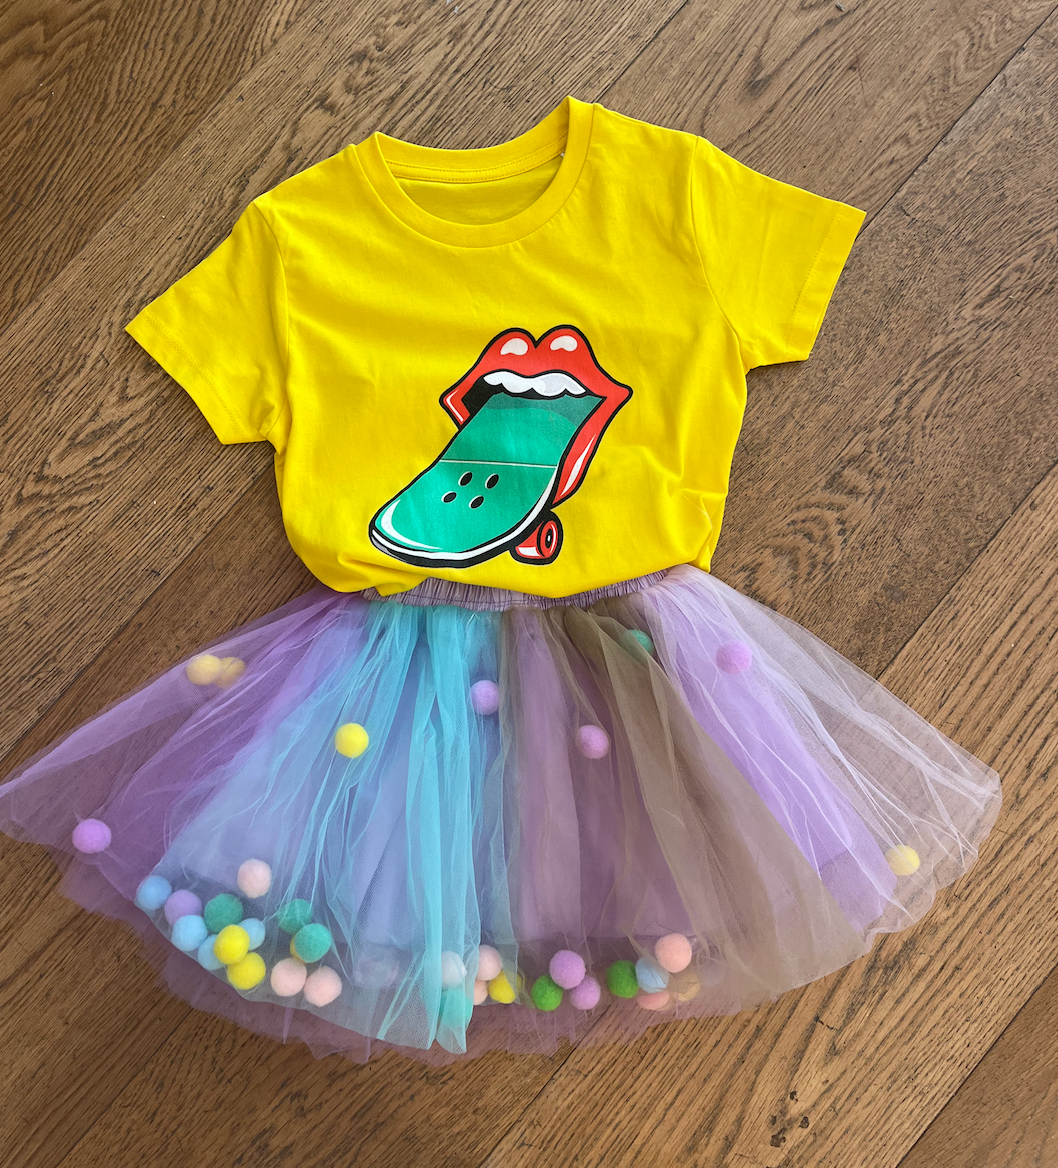 Elevate your child's style with the Kids Multicolored Pom Pom Tutu by Rock My Baby!